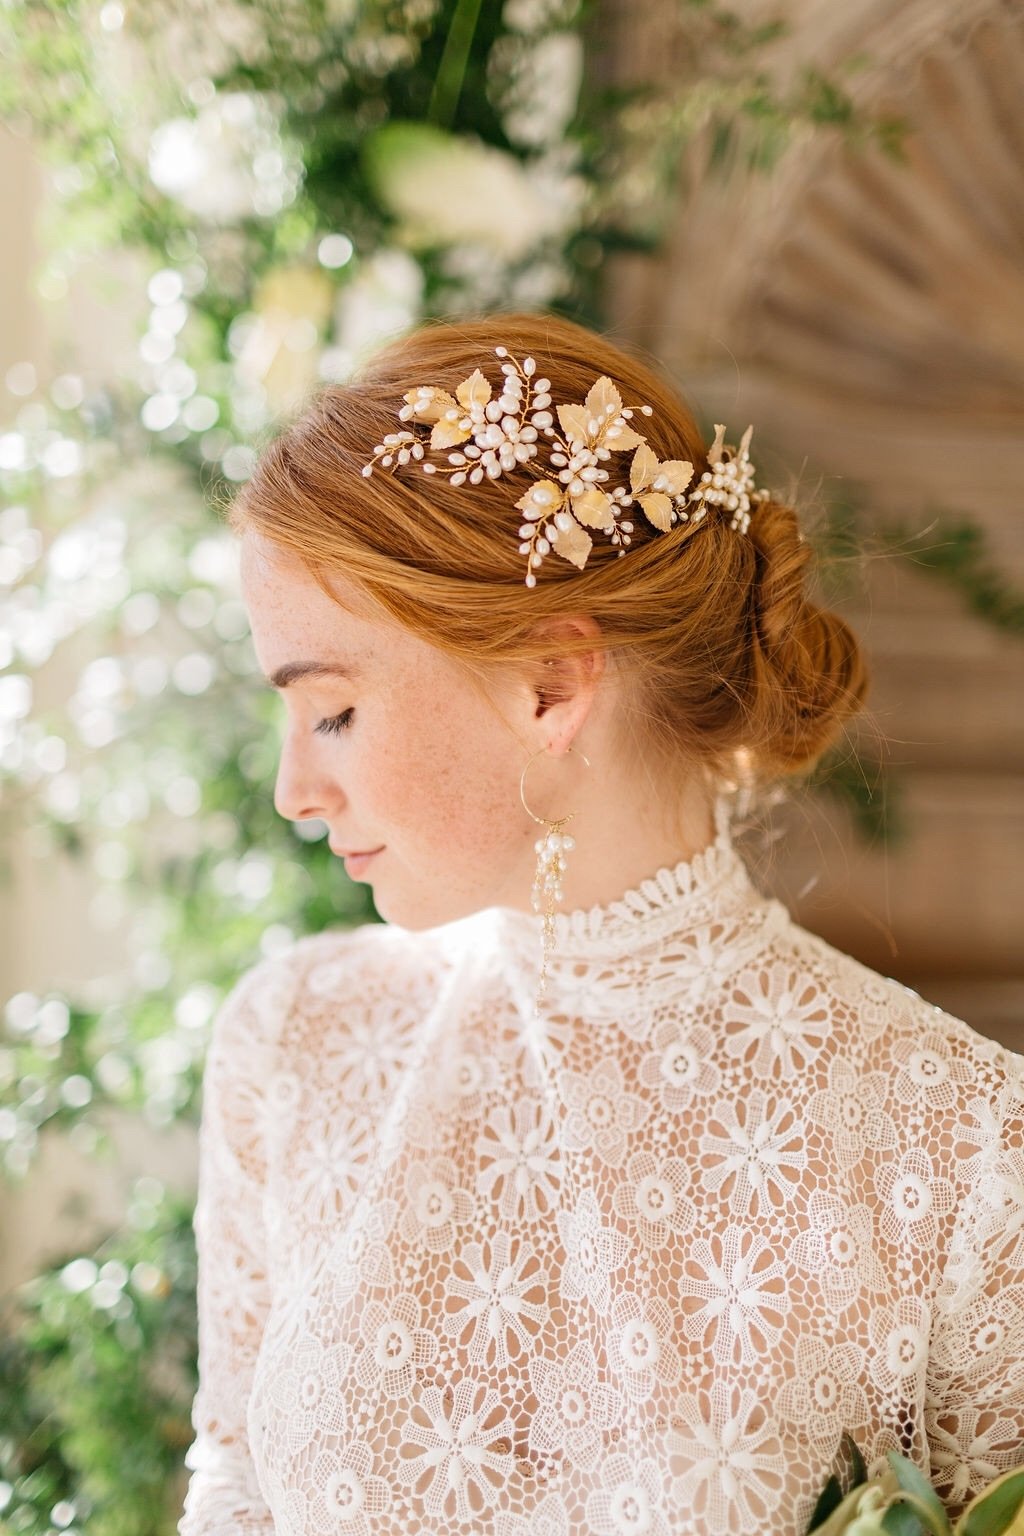 A bride with red hair worn in a low bun wears a pale gold leaf and freshwater pearls wedding headpiece made by Clare Lloyd